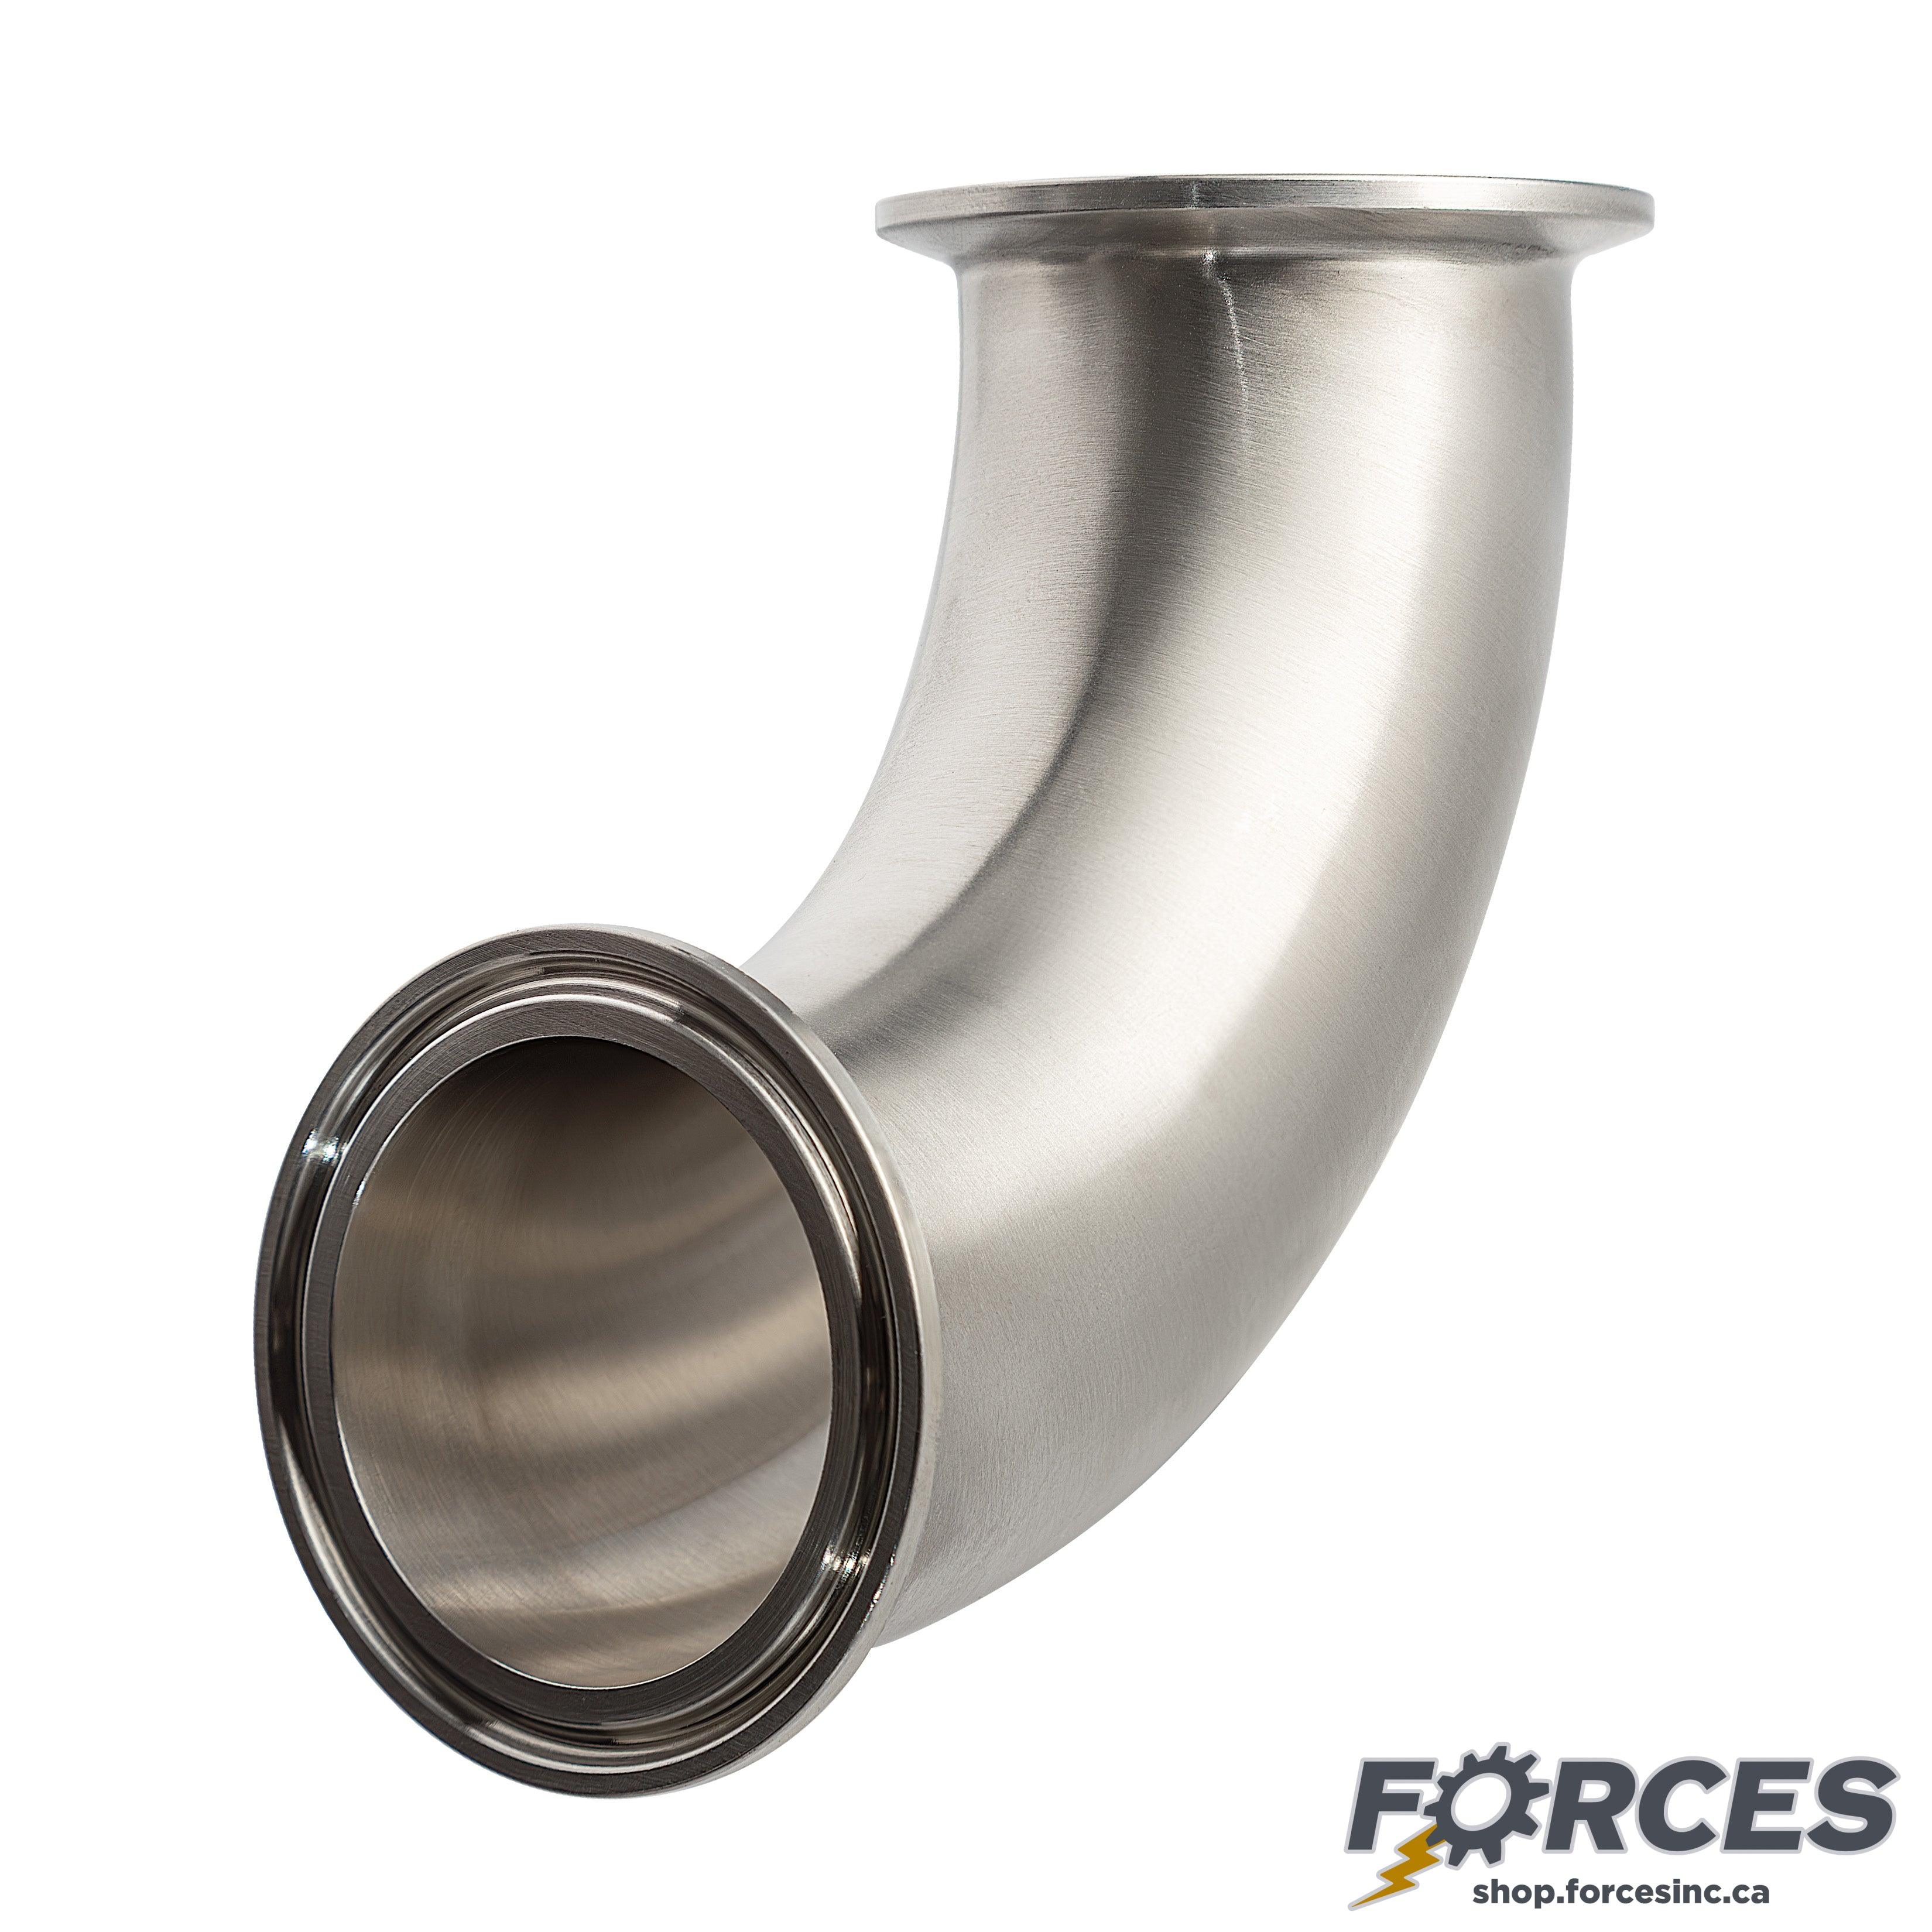 2" Tri-Clamp 90° Elbow - Stainless Steel 304 - Forces Inc